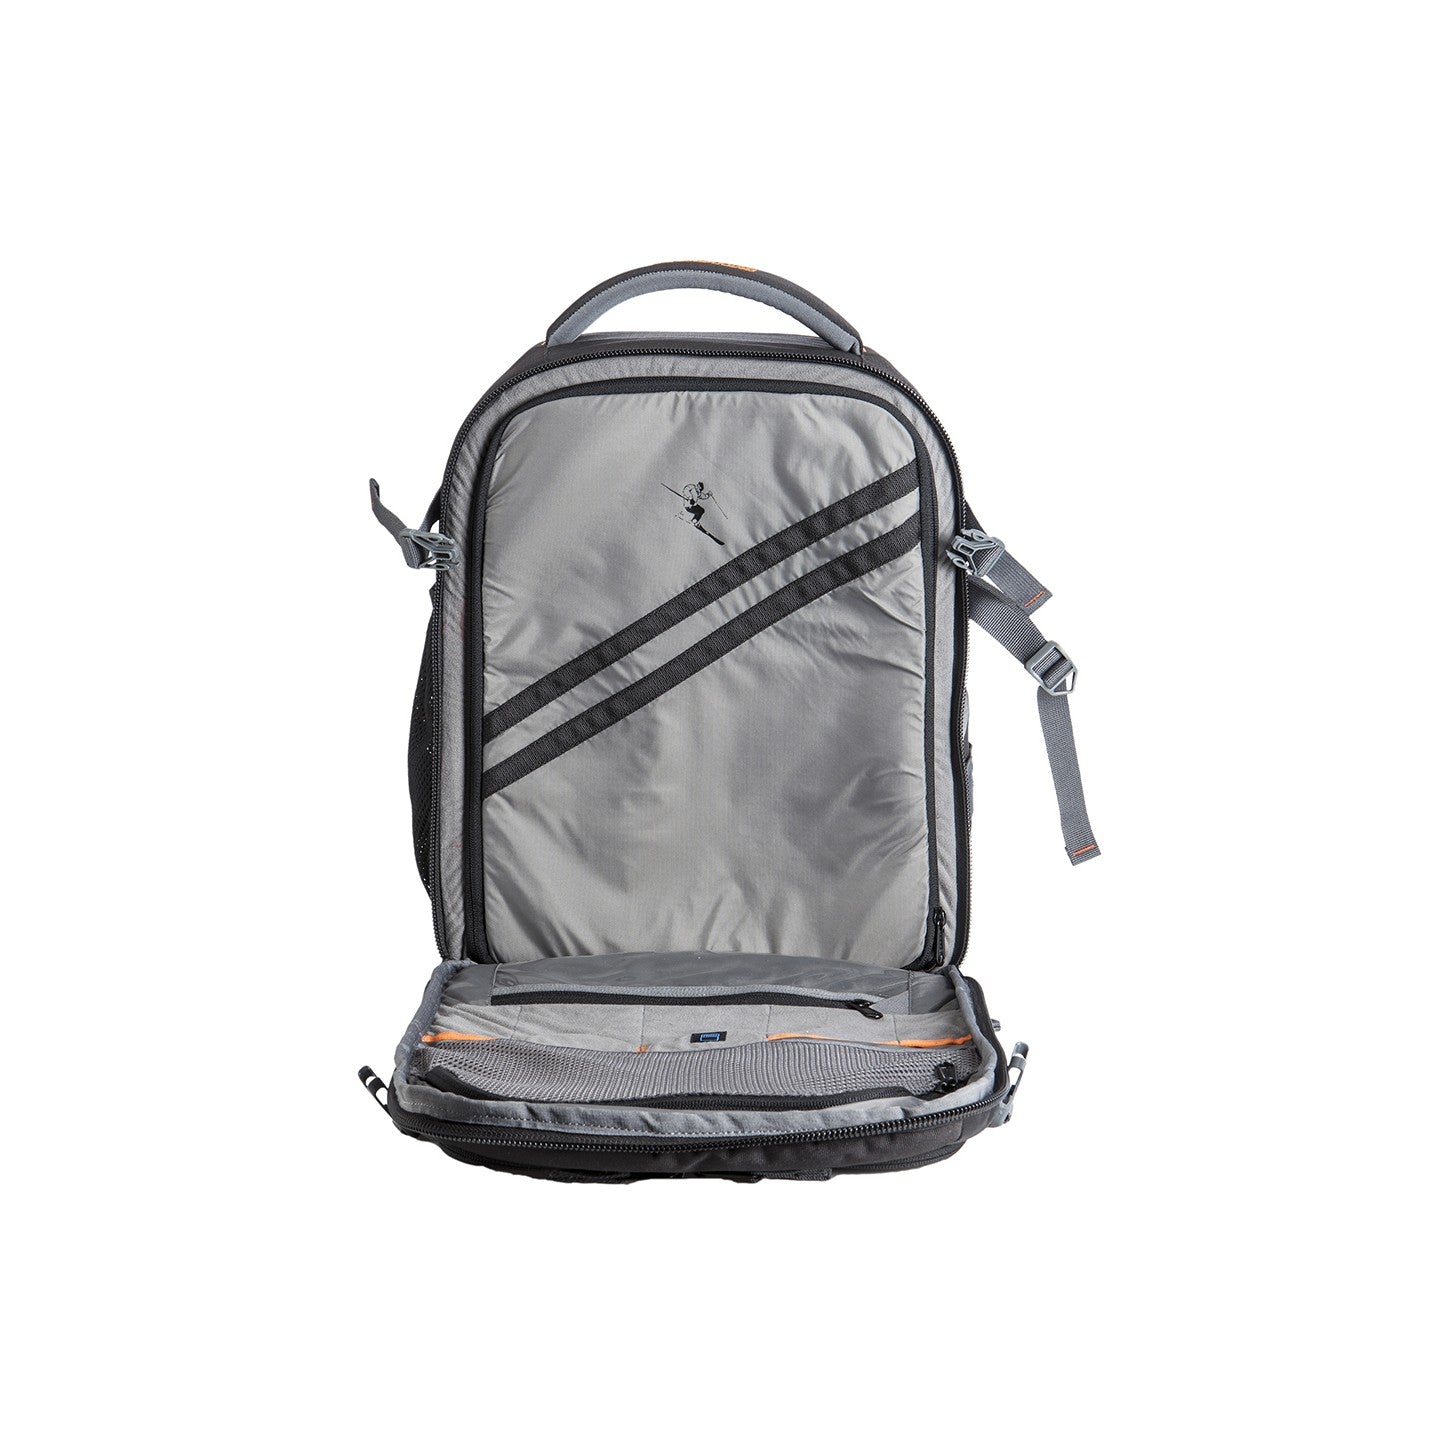 Image: Open view of the P36 Torino 1 video camera backpack, revealing its zipper compartment that acts as an additional layer of protection for the camera and equipment. This compartment helps prevent accidental falls or damage when the bag is opened, ensuring the safety and security of your gear. Stay confident and worry-free during your video shoots with the added protection of the P36 Torino 1.